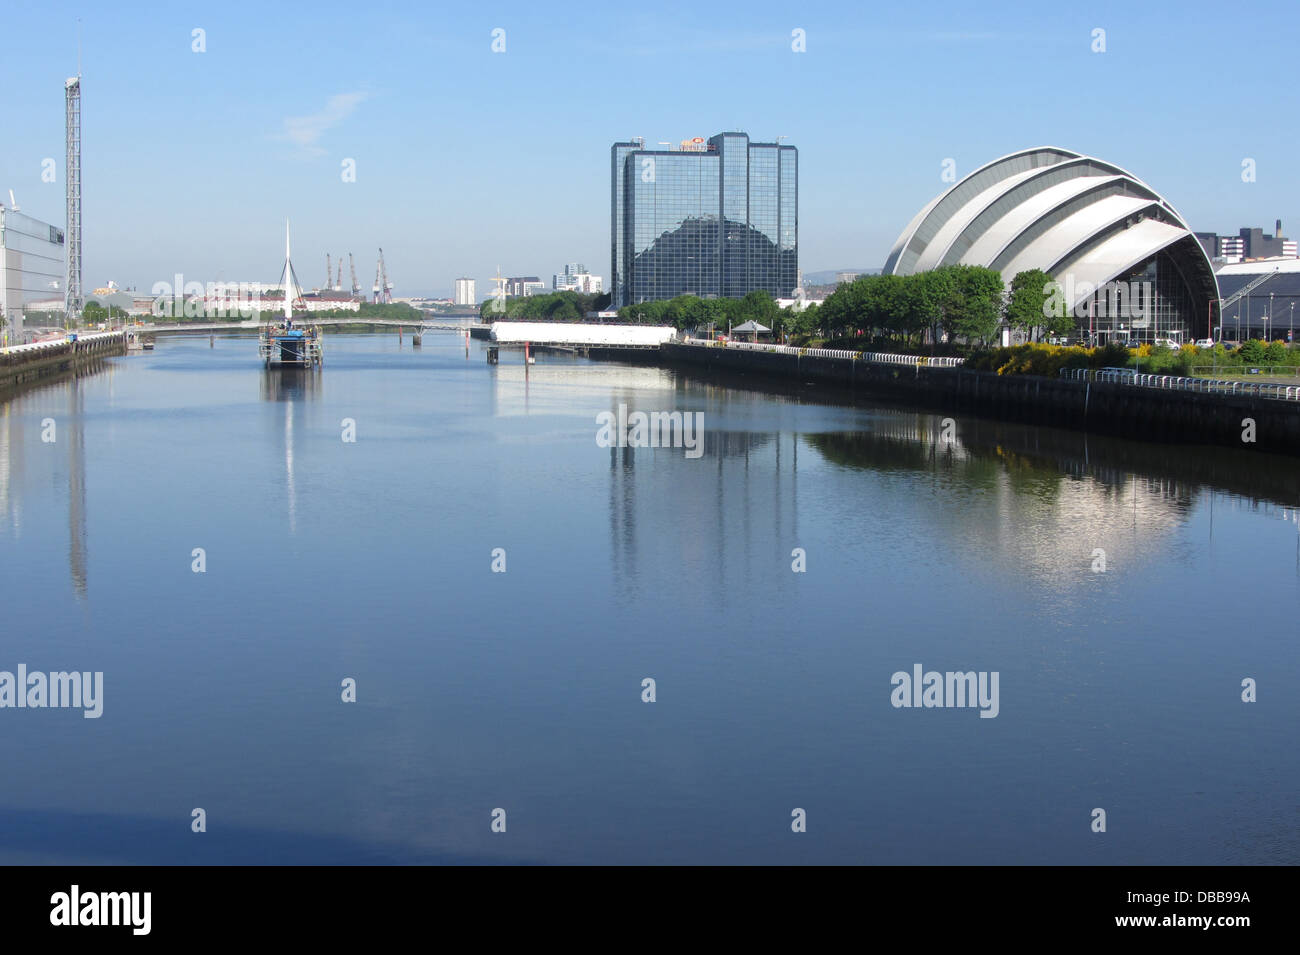 The Clyde Auditorium also known as the Armadillo, designed by Norman Foster on the north bank of the River Clyde, Glasgow Stock Photo